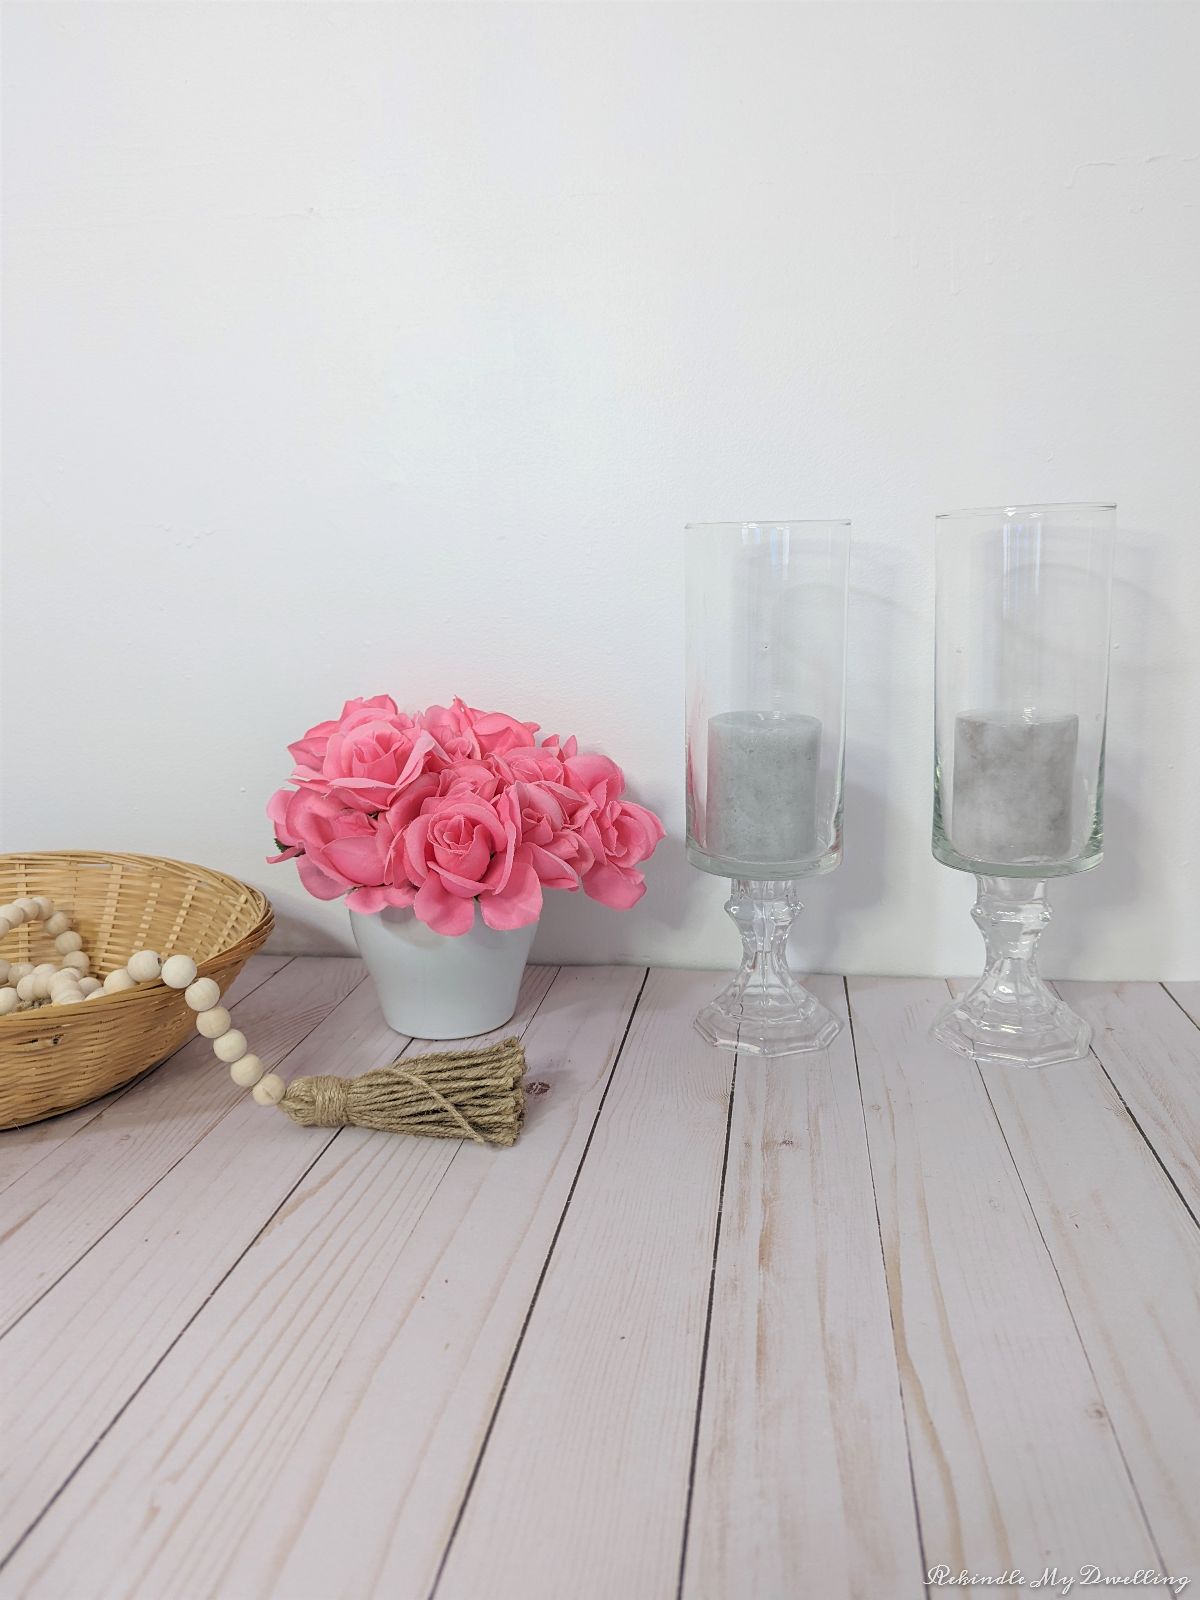 Pedestal vases with candles next to a bouquet of flowers, basket and garland.